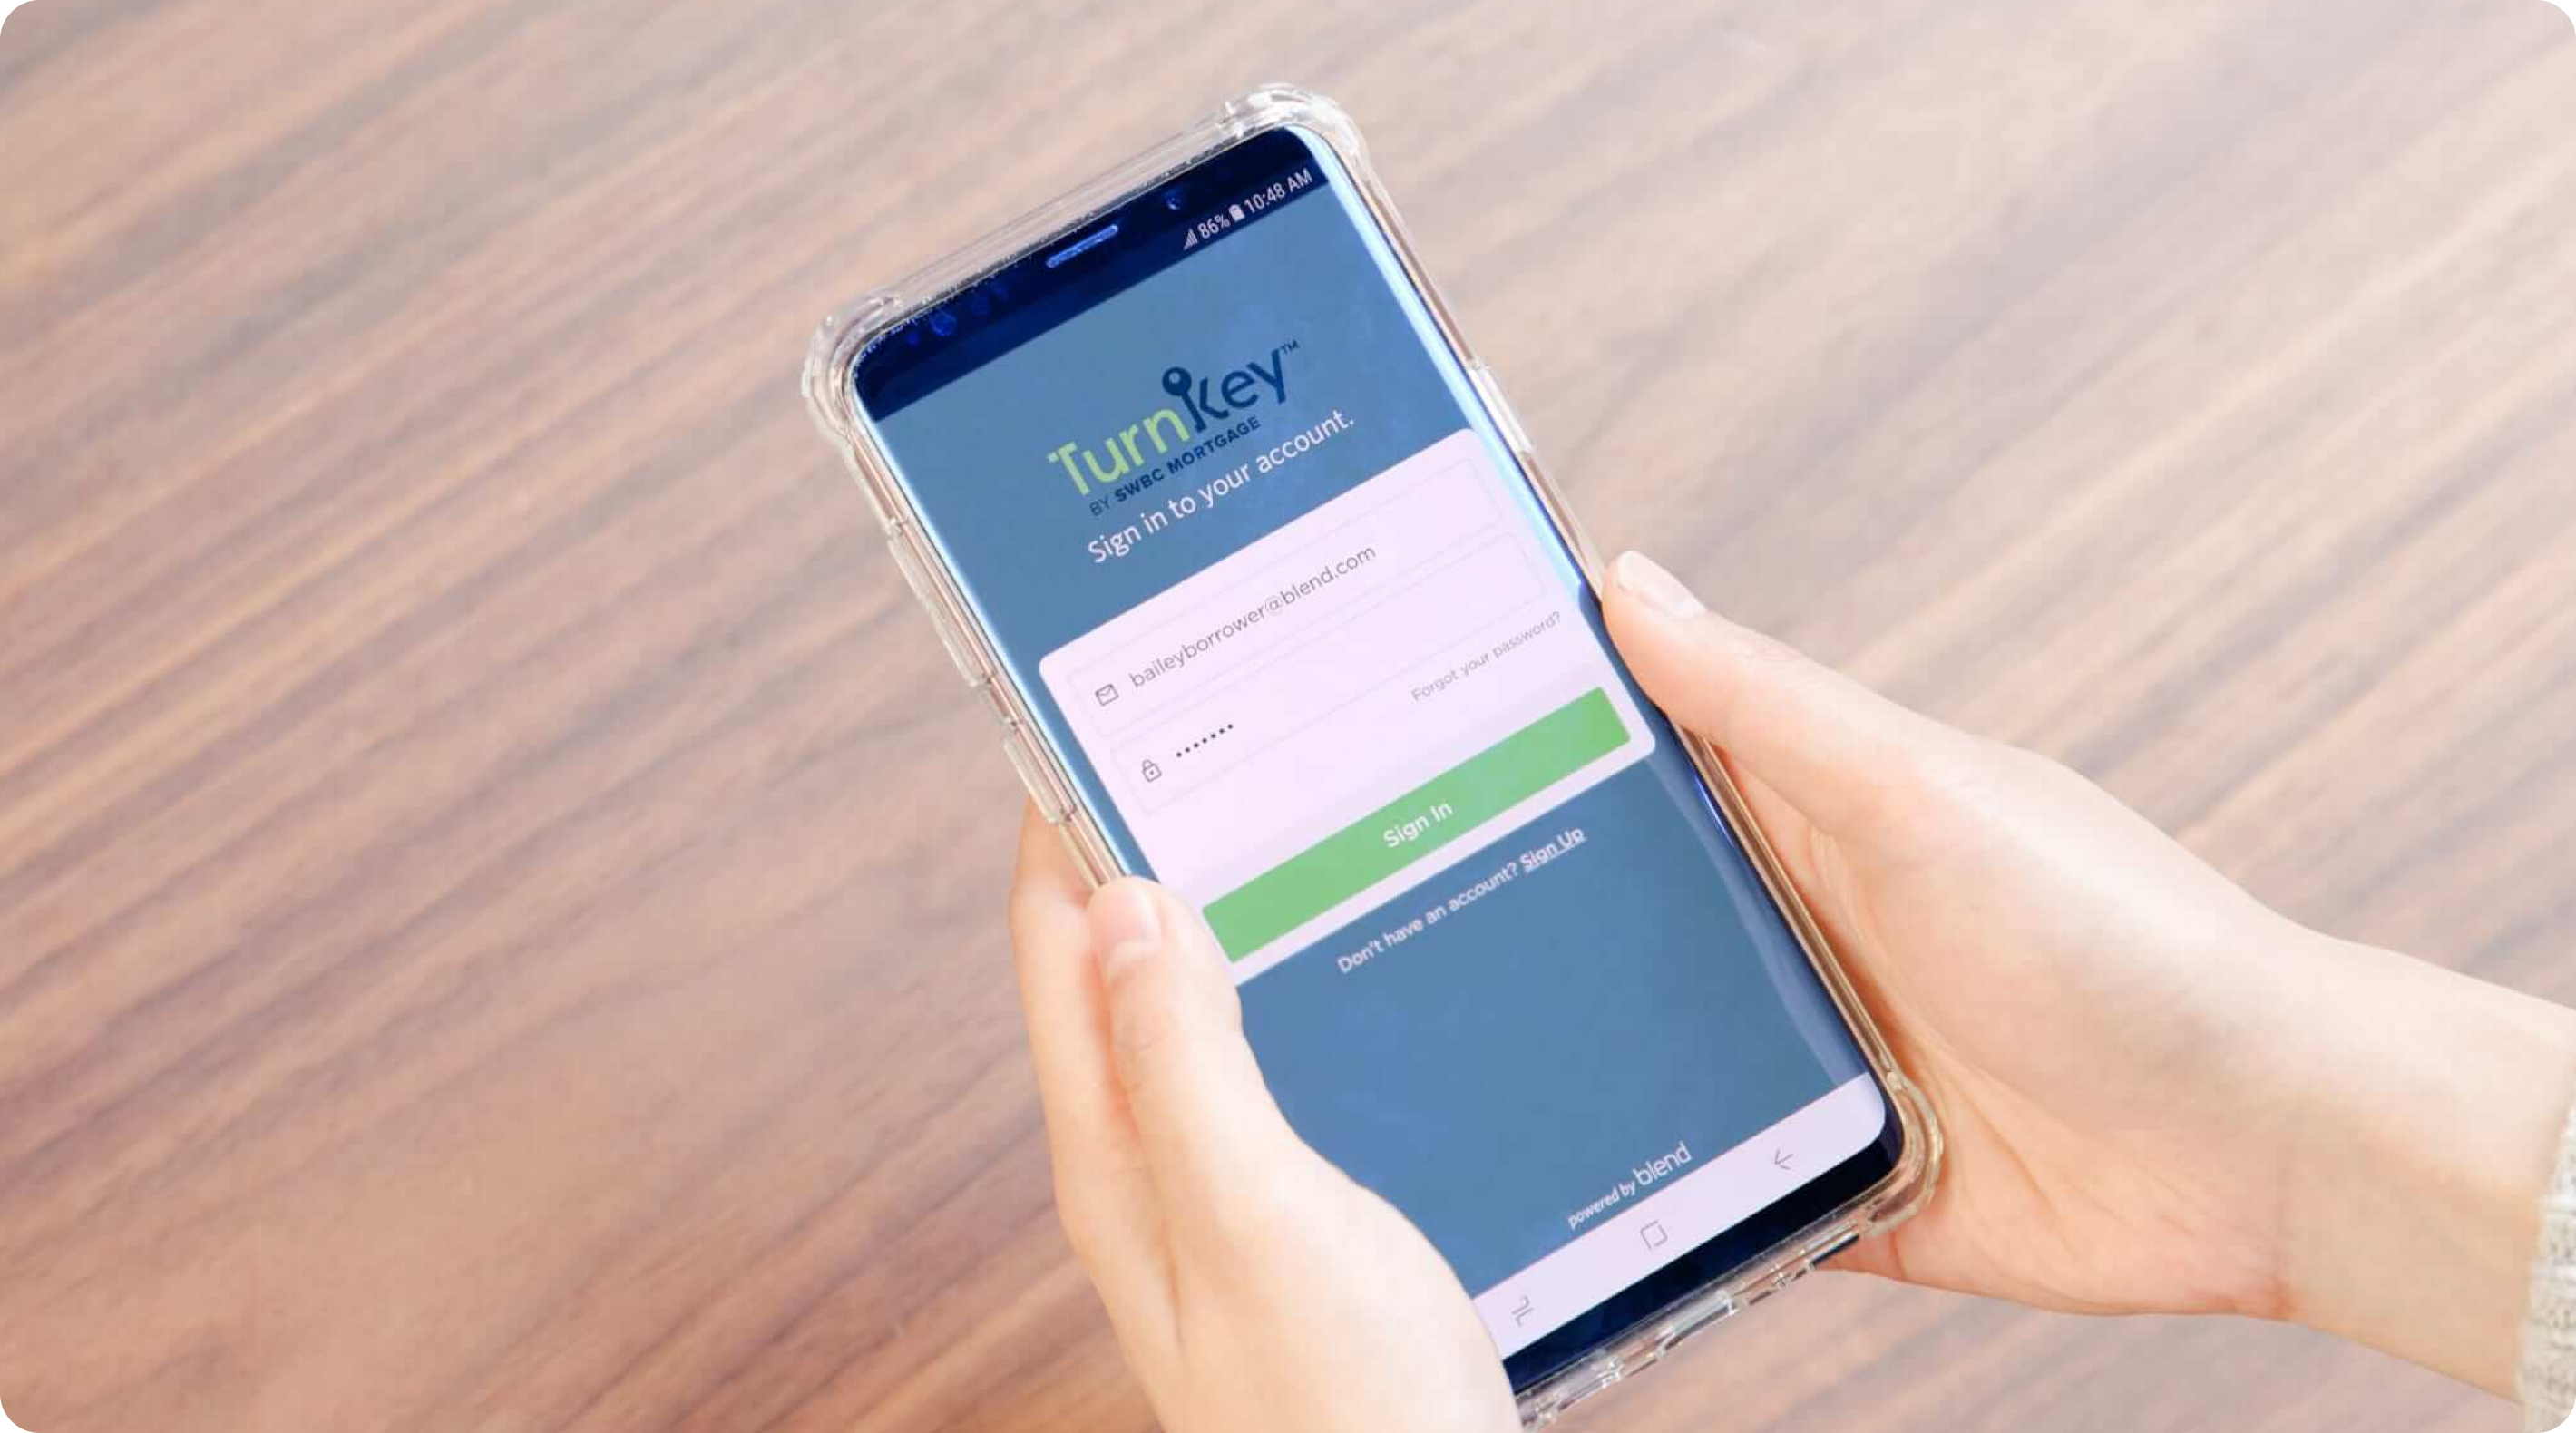 Image of hands holding mobile phone with screen of Turnkey login